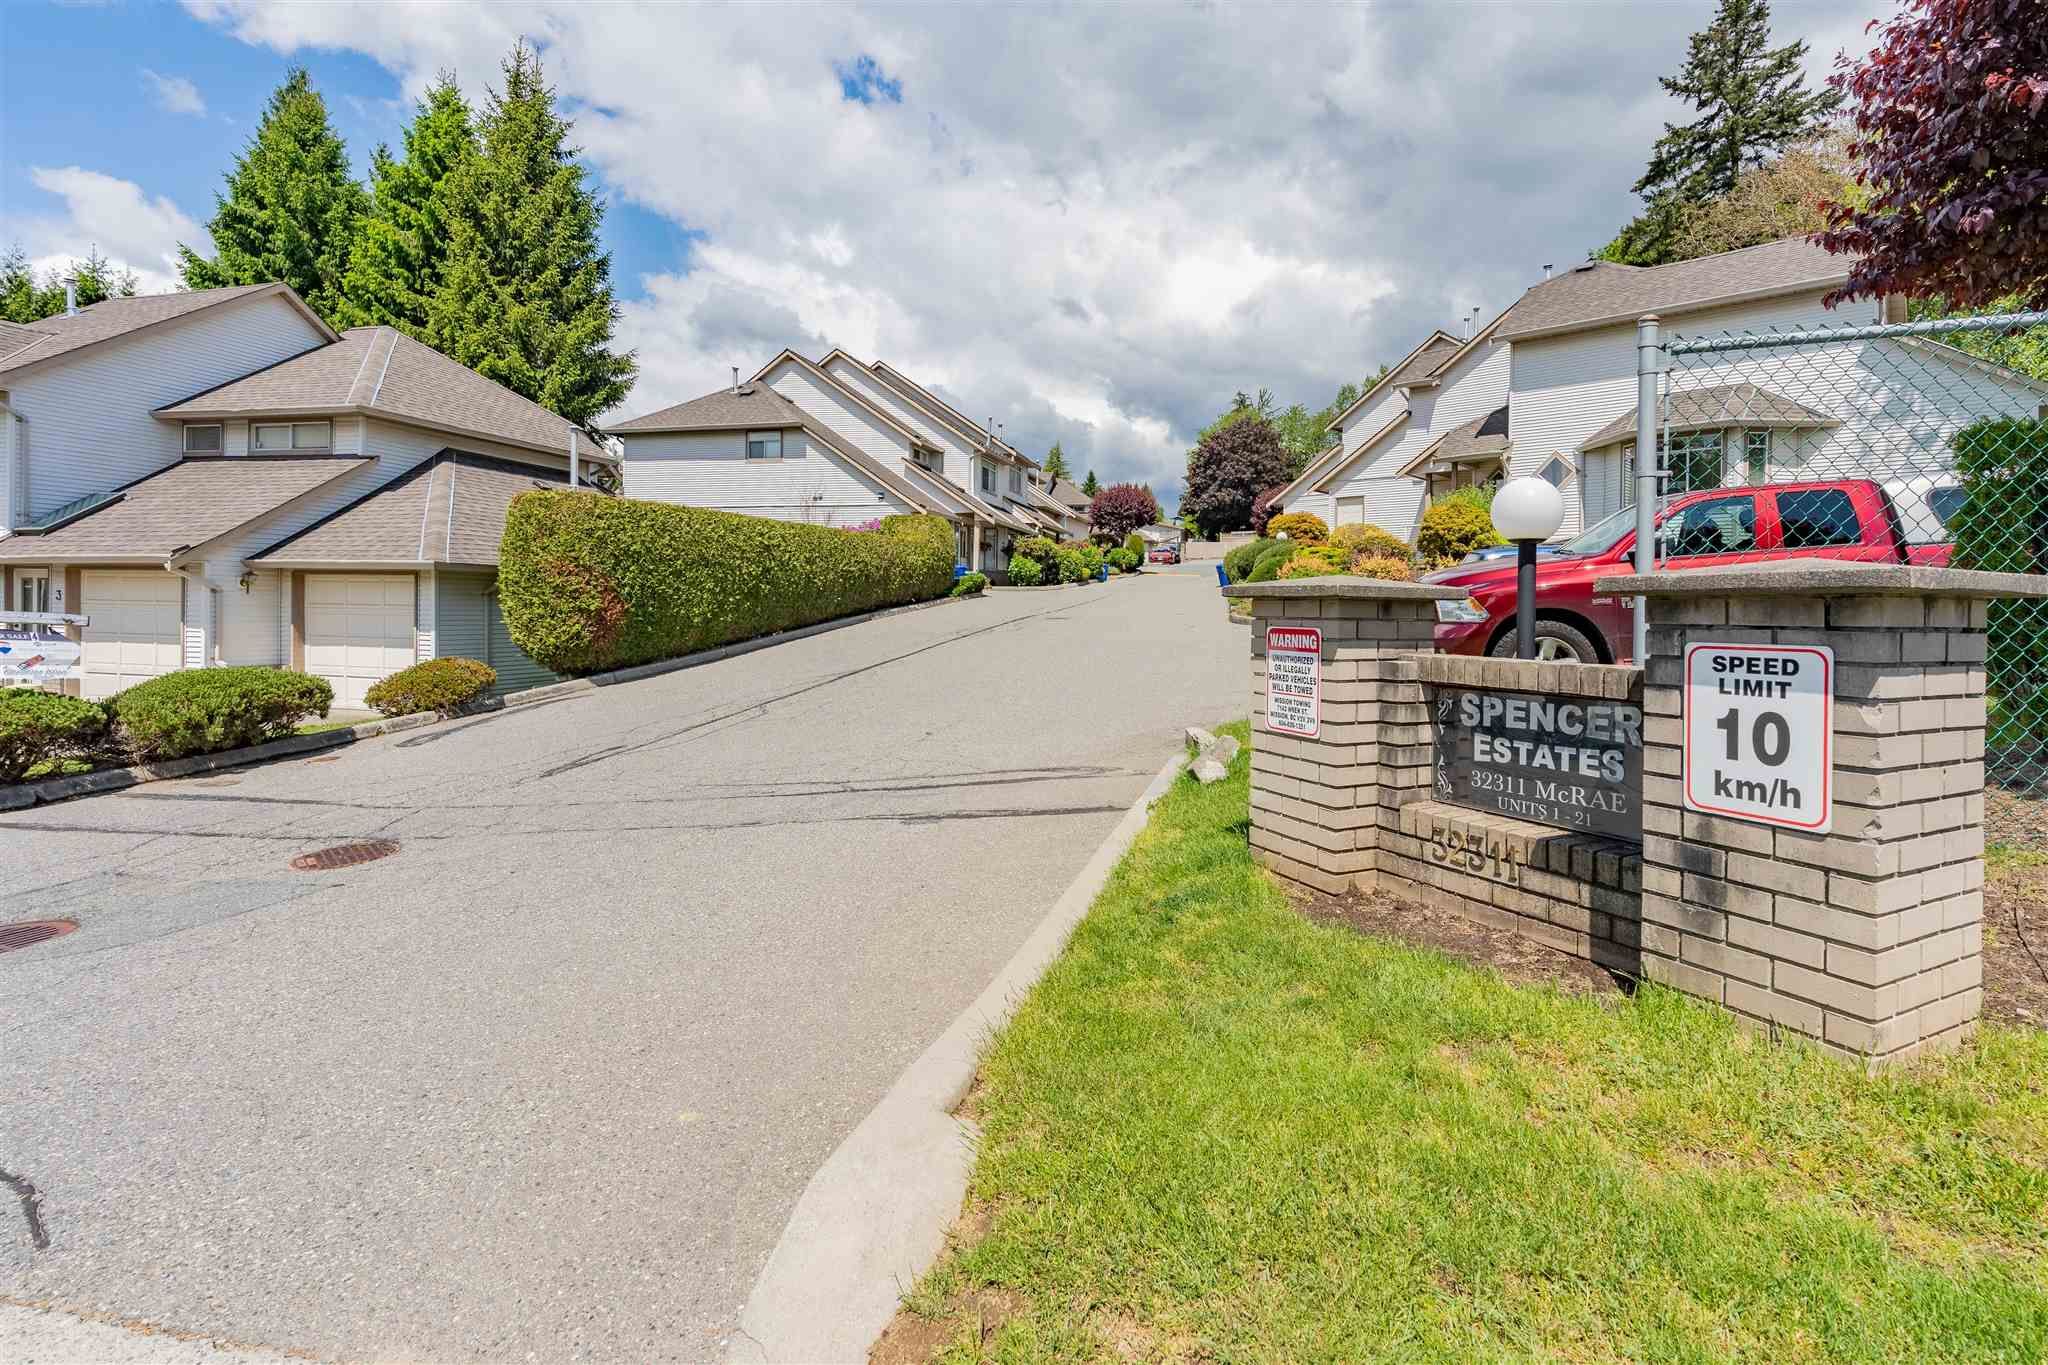 Main Photo: 6 32311 MCRAE Avenue in Mission: Mission BC Townhouse for sale in "Spencer Estates" : MLS®# R2600582